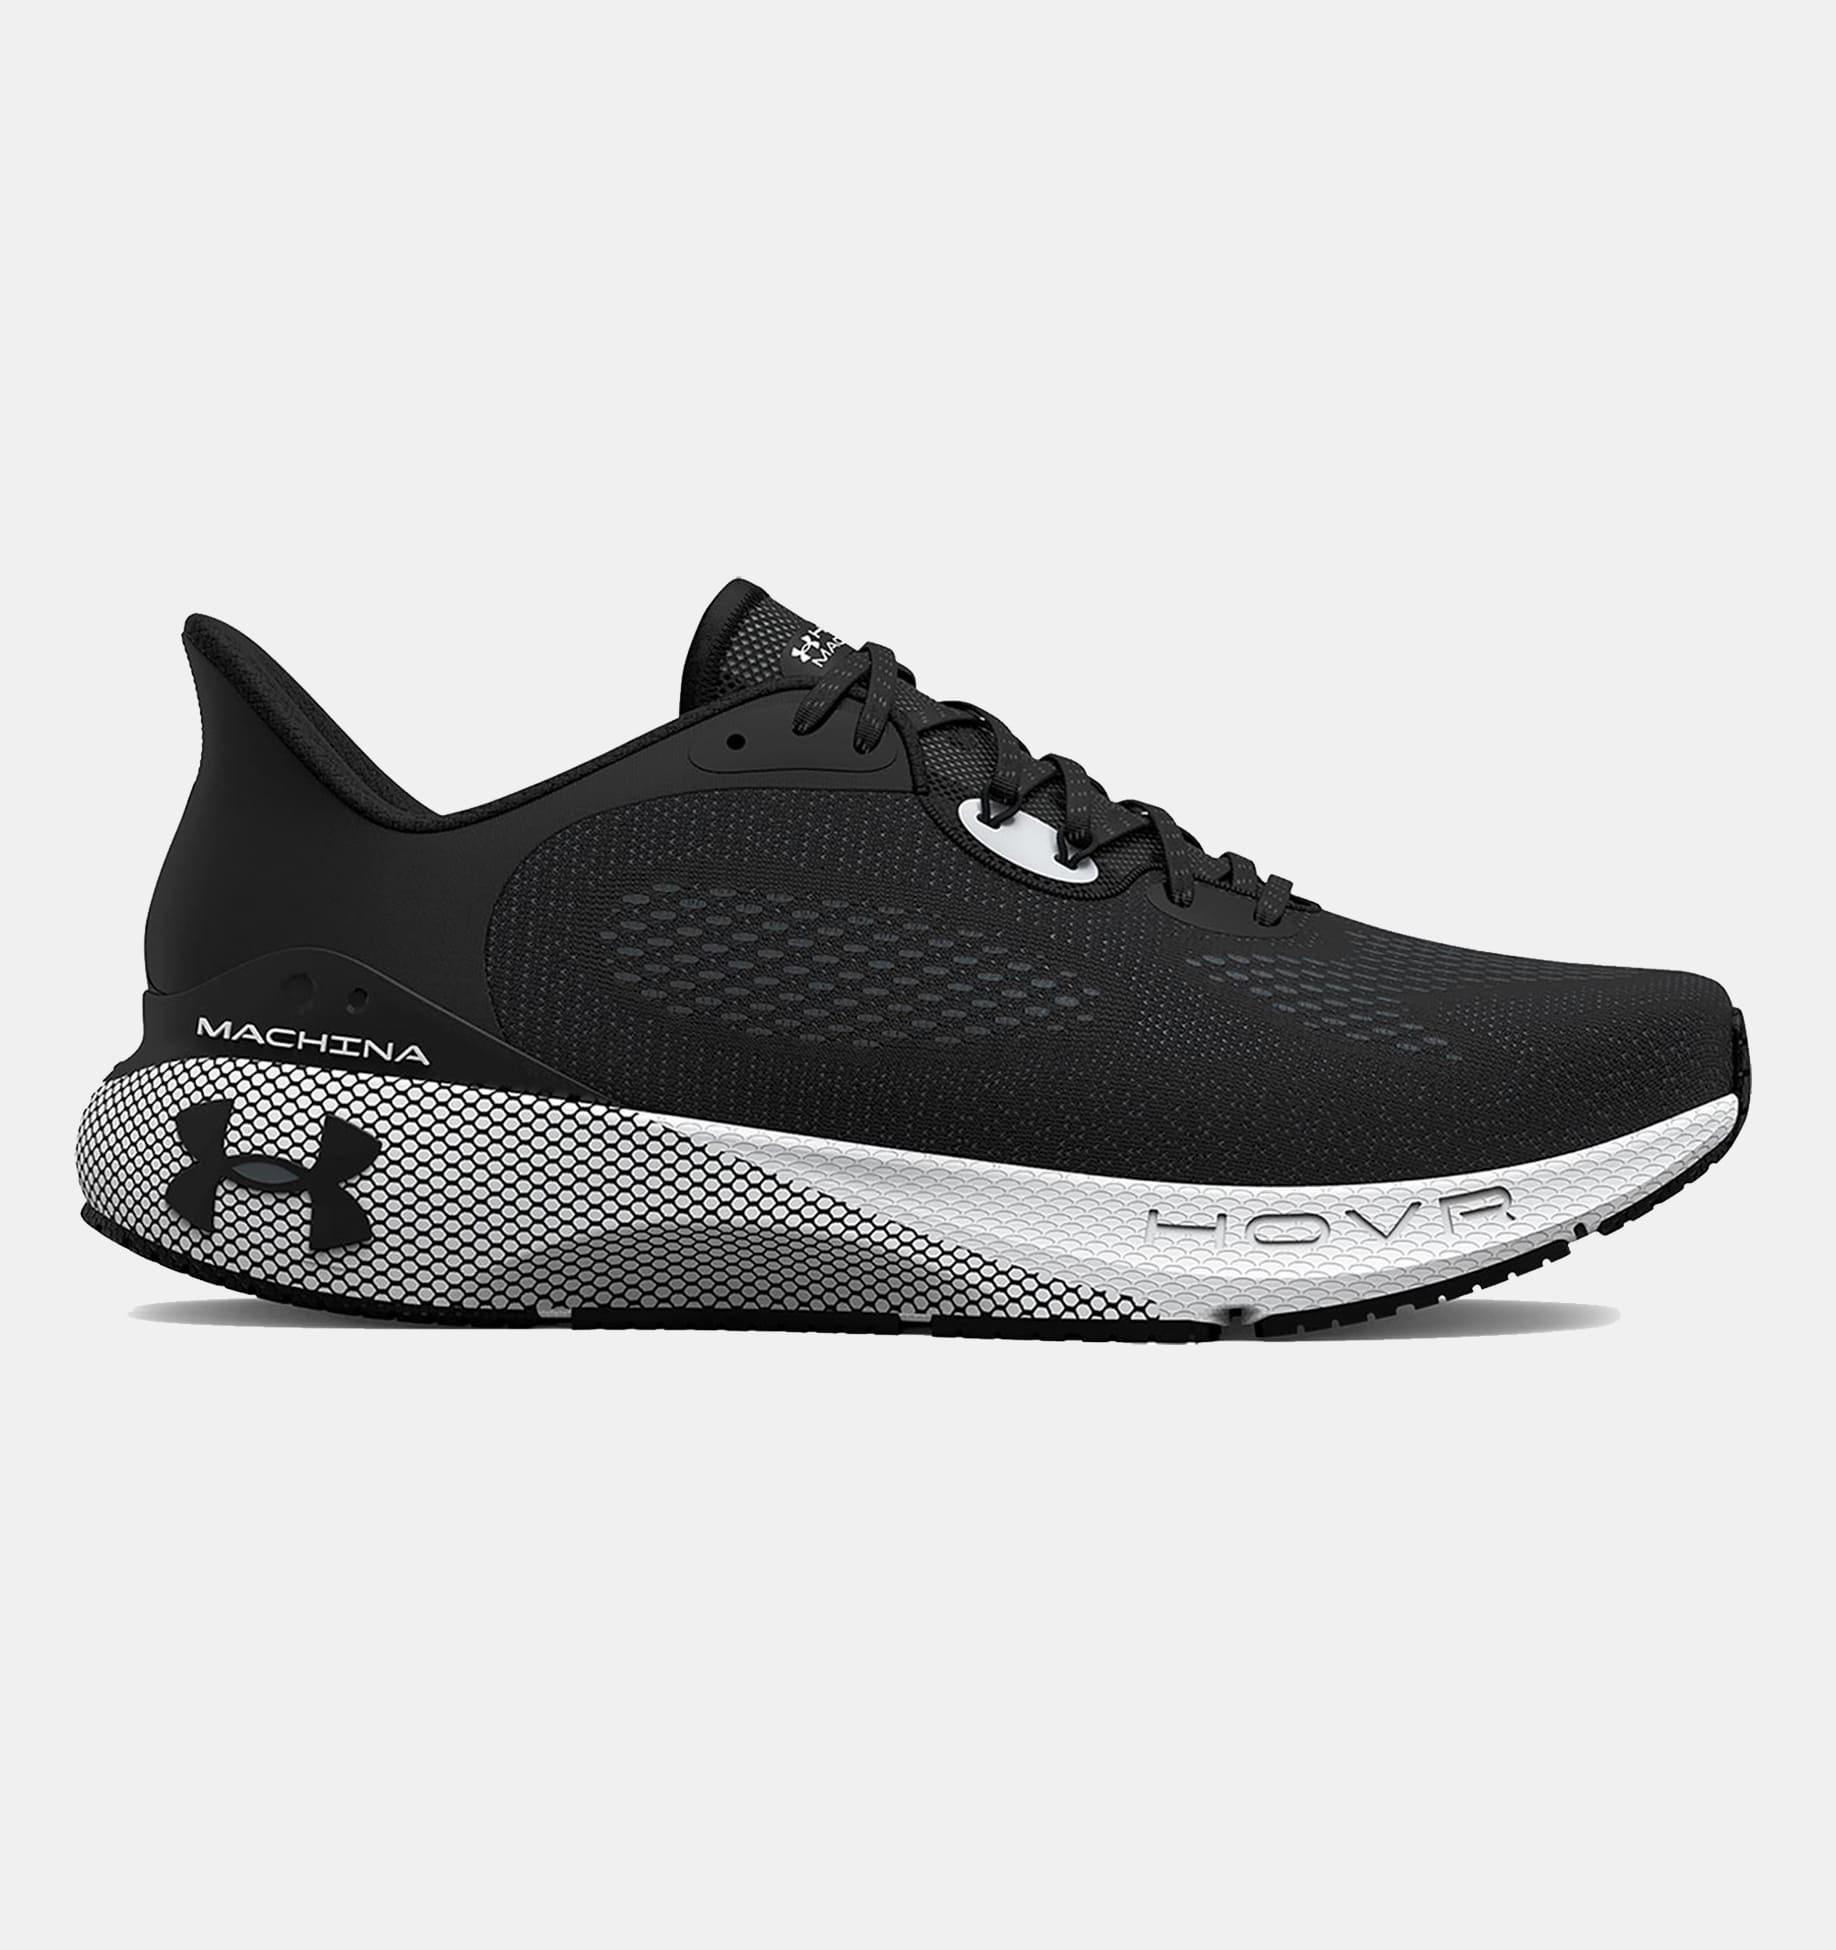 Under Armour HOVR mujer